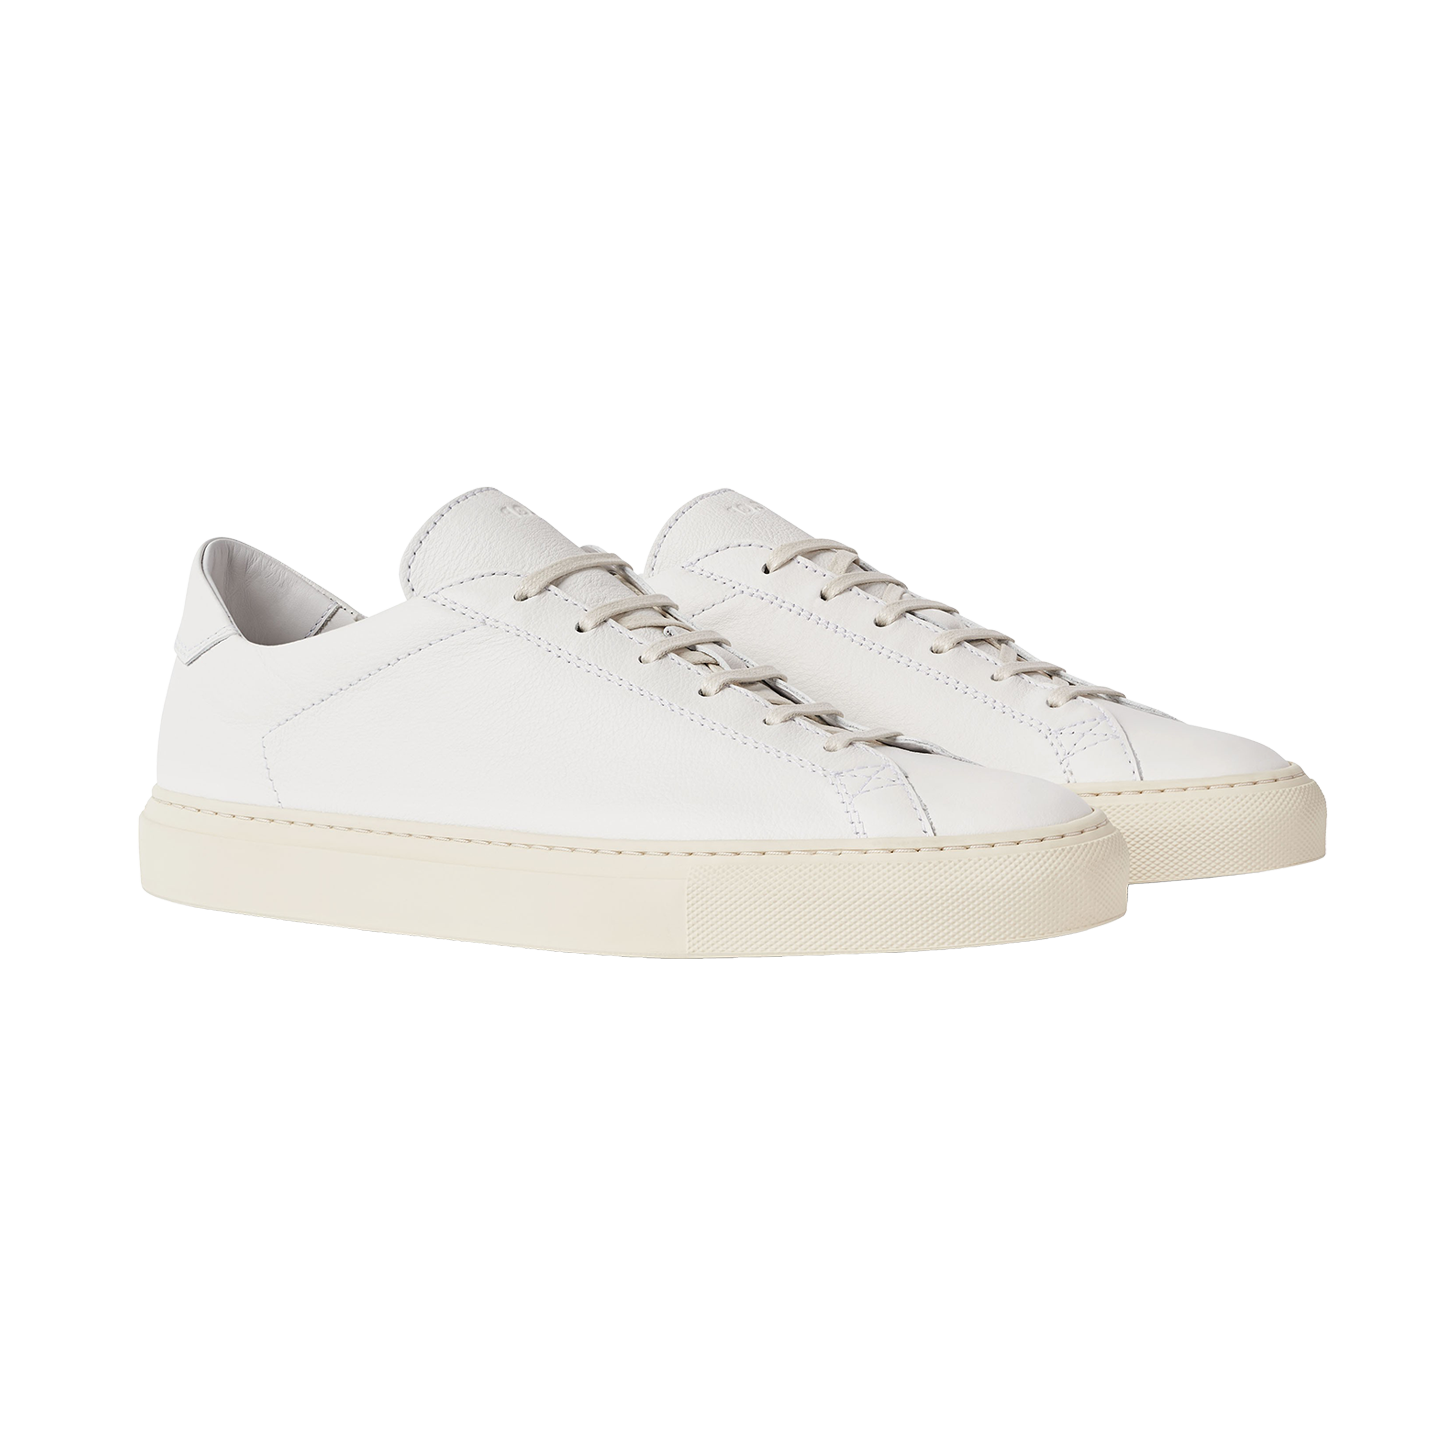 classic white leather sneakers